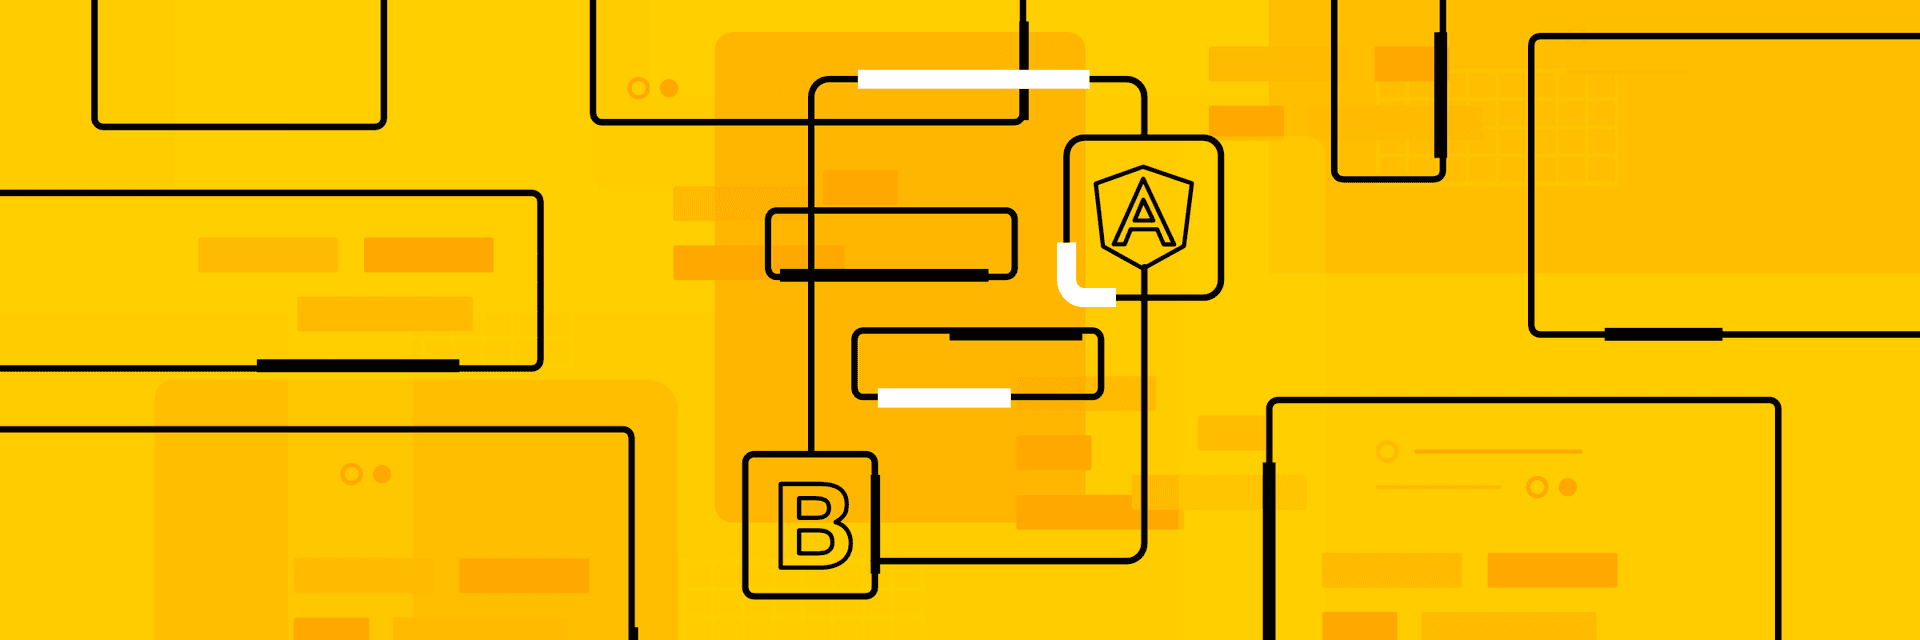 Building a Web App with Angular and Bootstrap